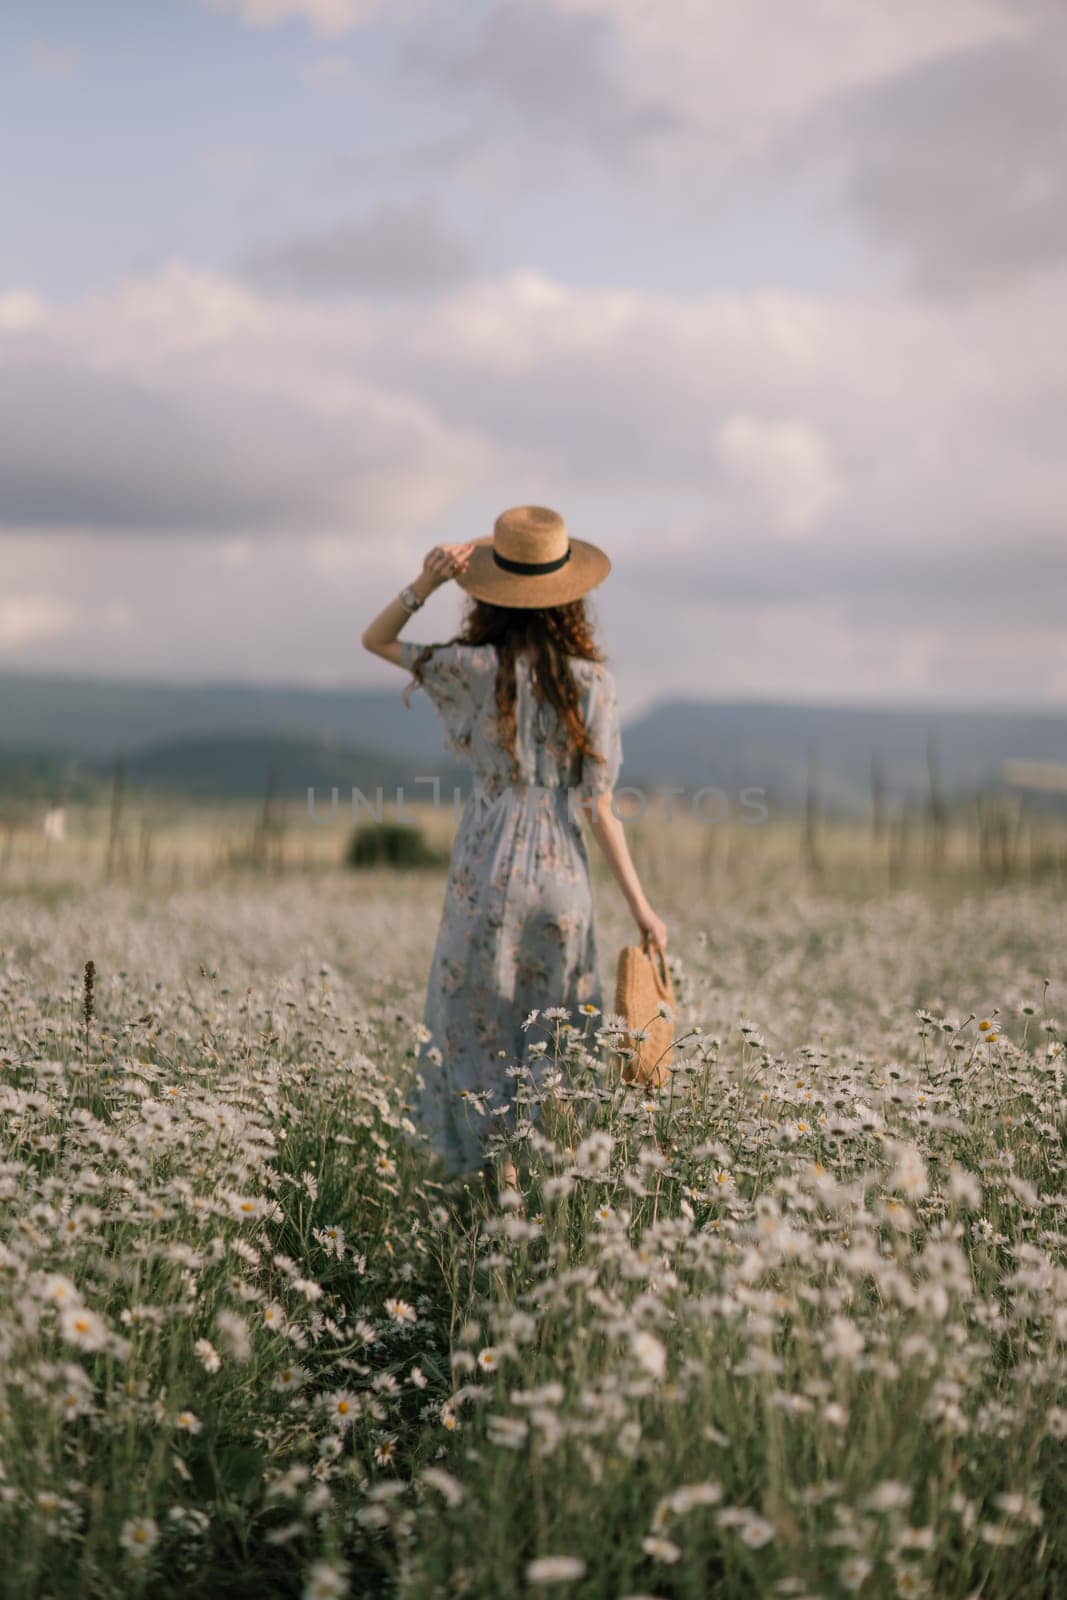 A woman is walking through a field of flowers, wearing a straw hat and carrying a basket. The scene is peaceful and serene, with the woman standing in the middle of the field